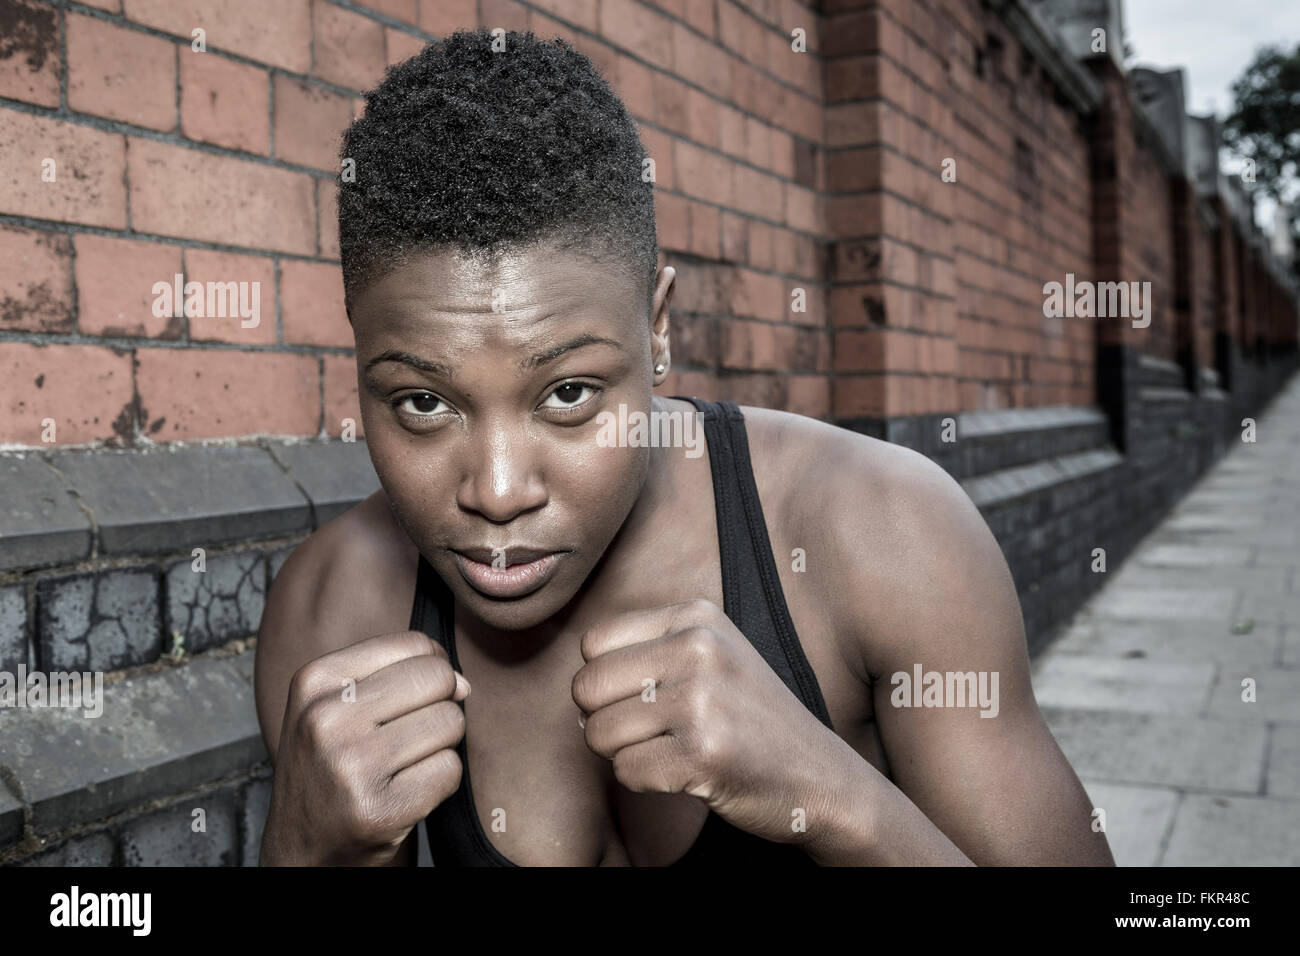 Black athlete with fists raised outdoors Stock Photo